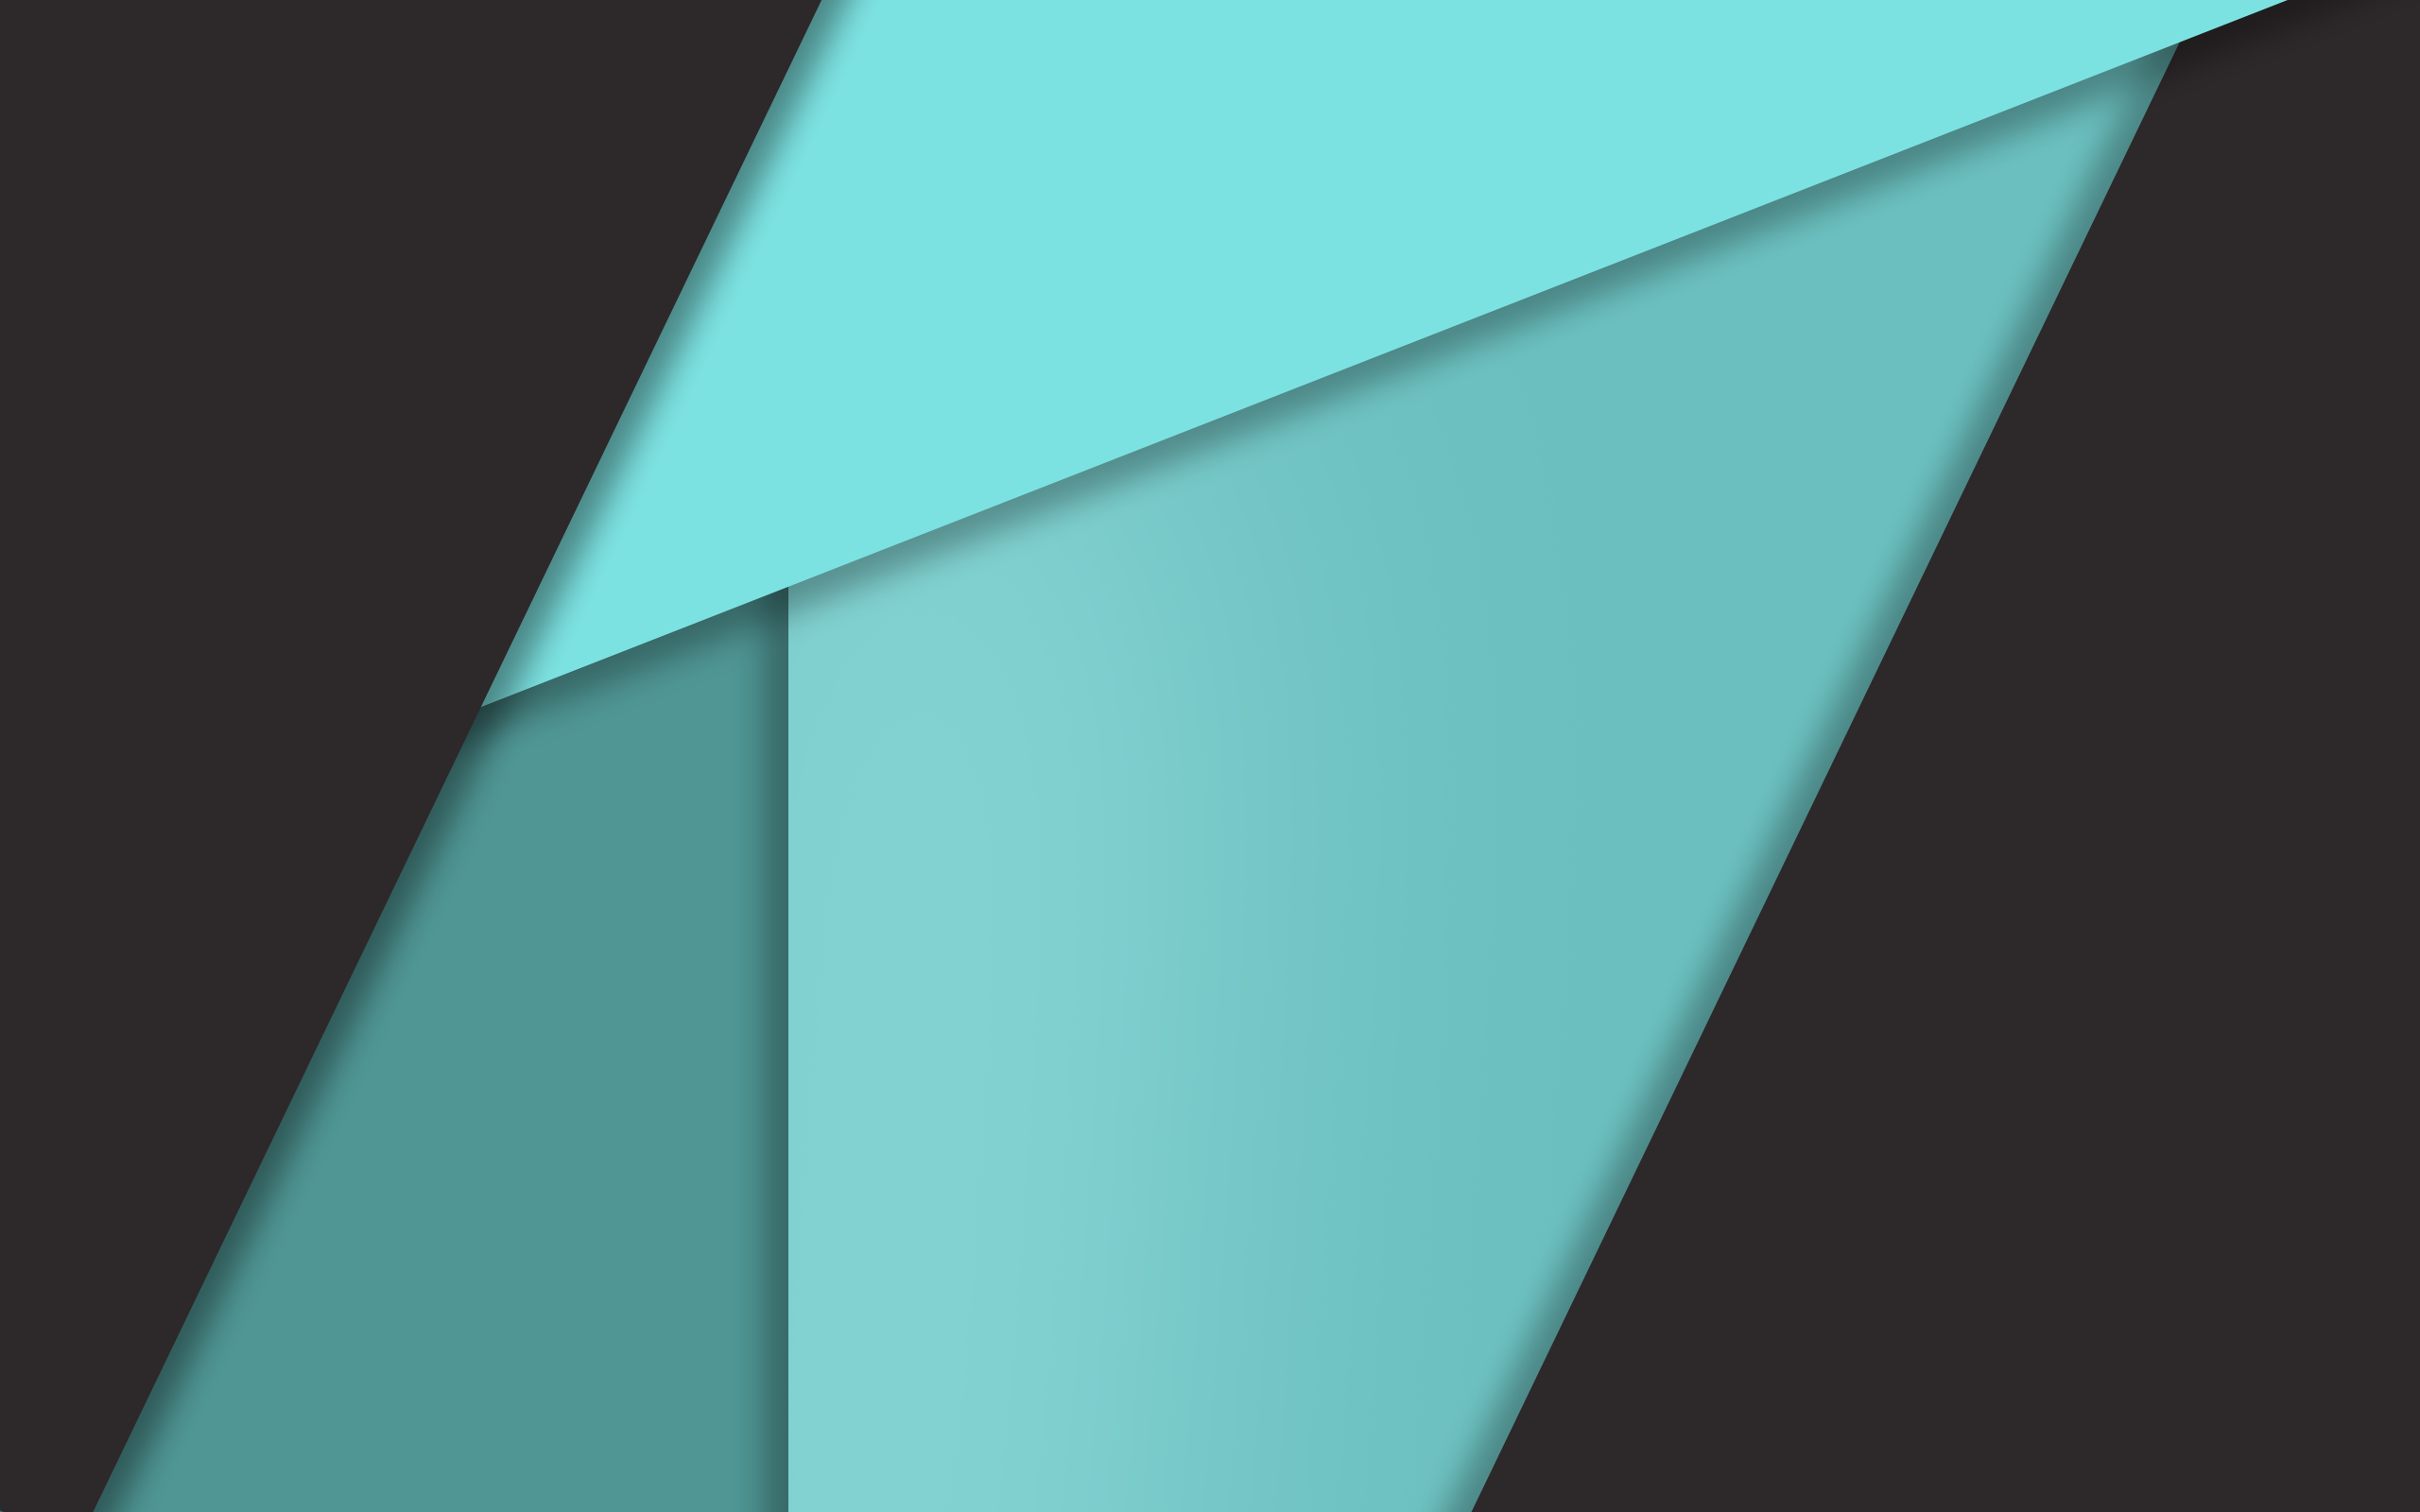 20 Best Material Design HD Wallpapers and Images Free ...